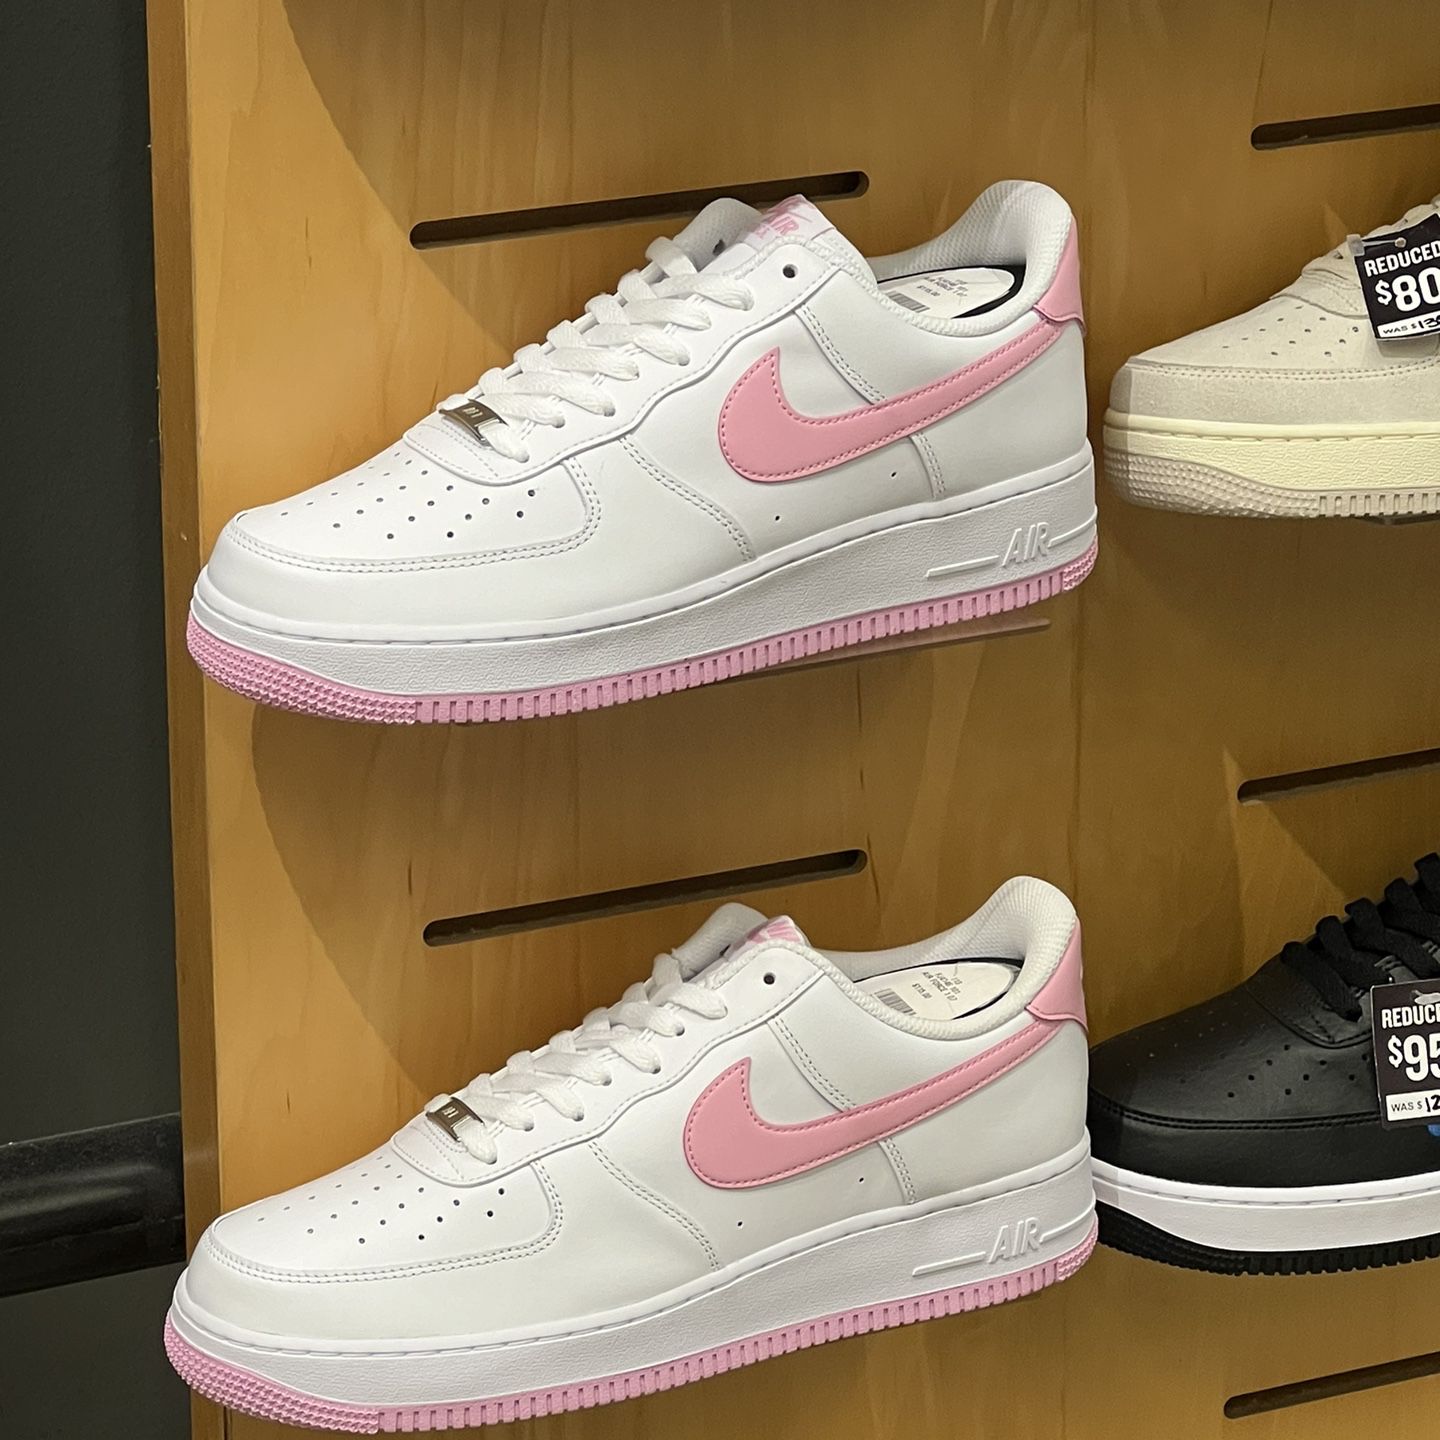 Pink and white Air Force 1 